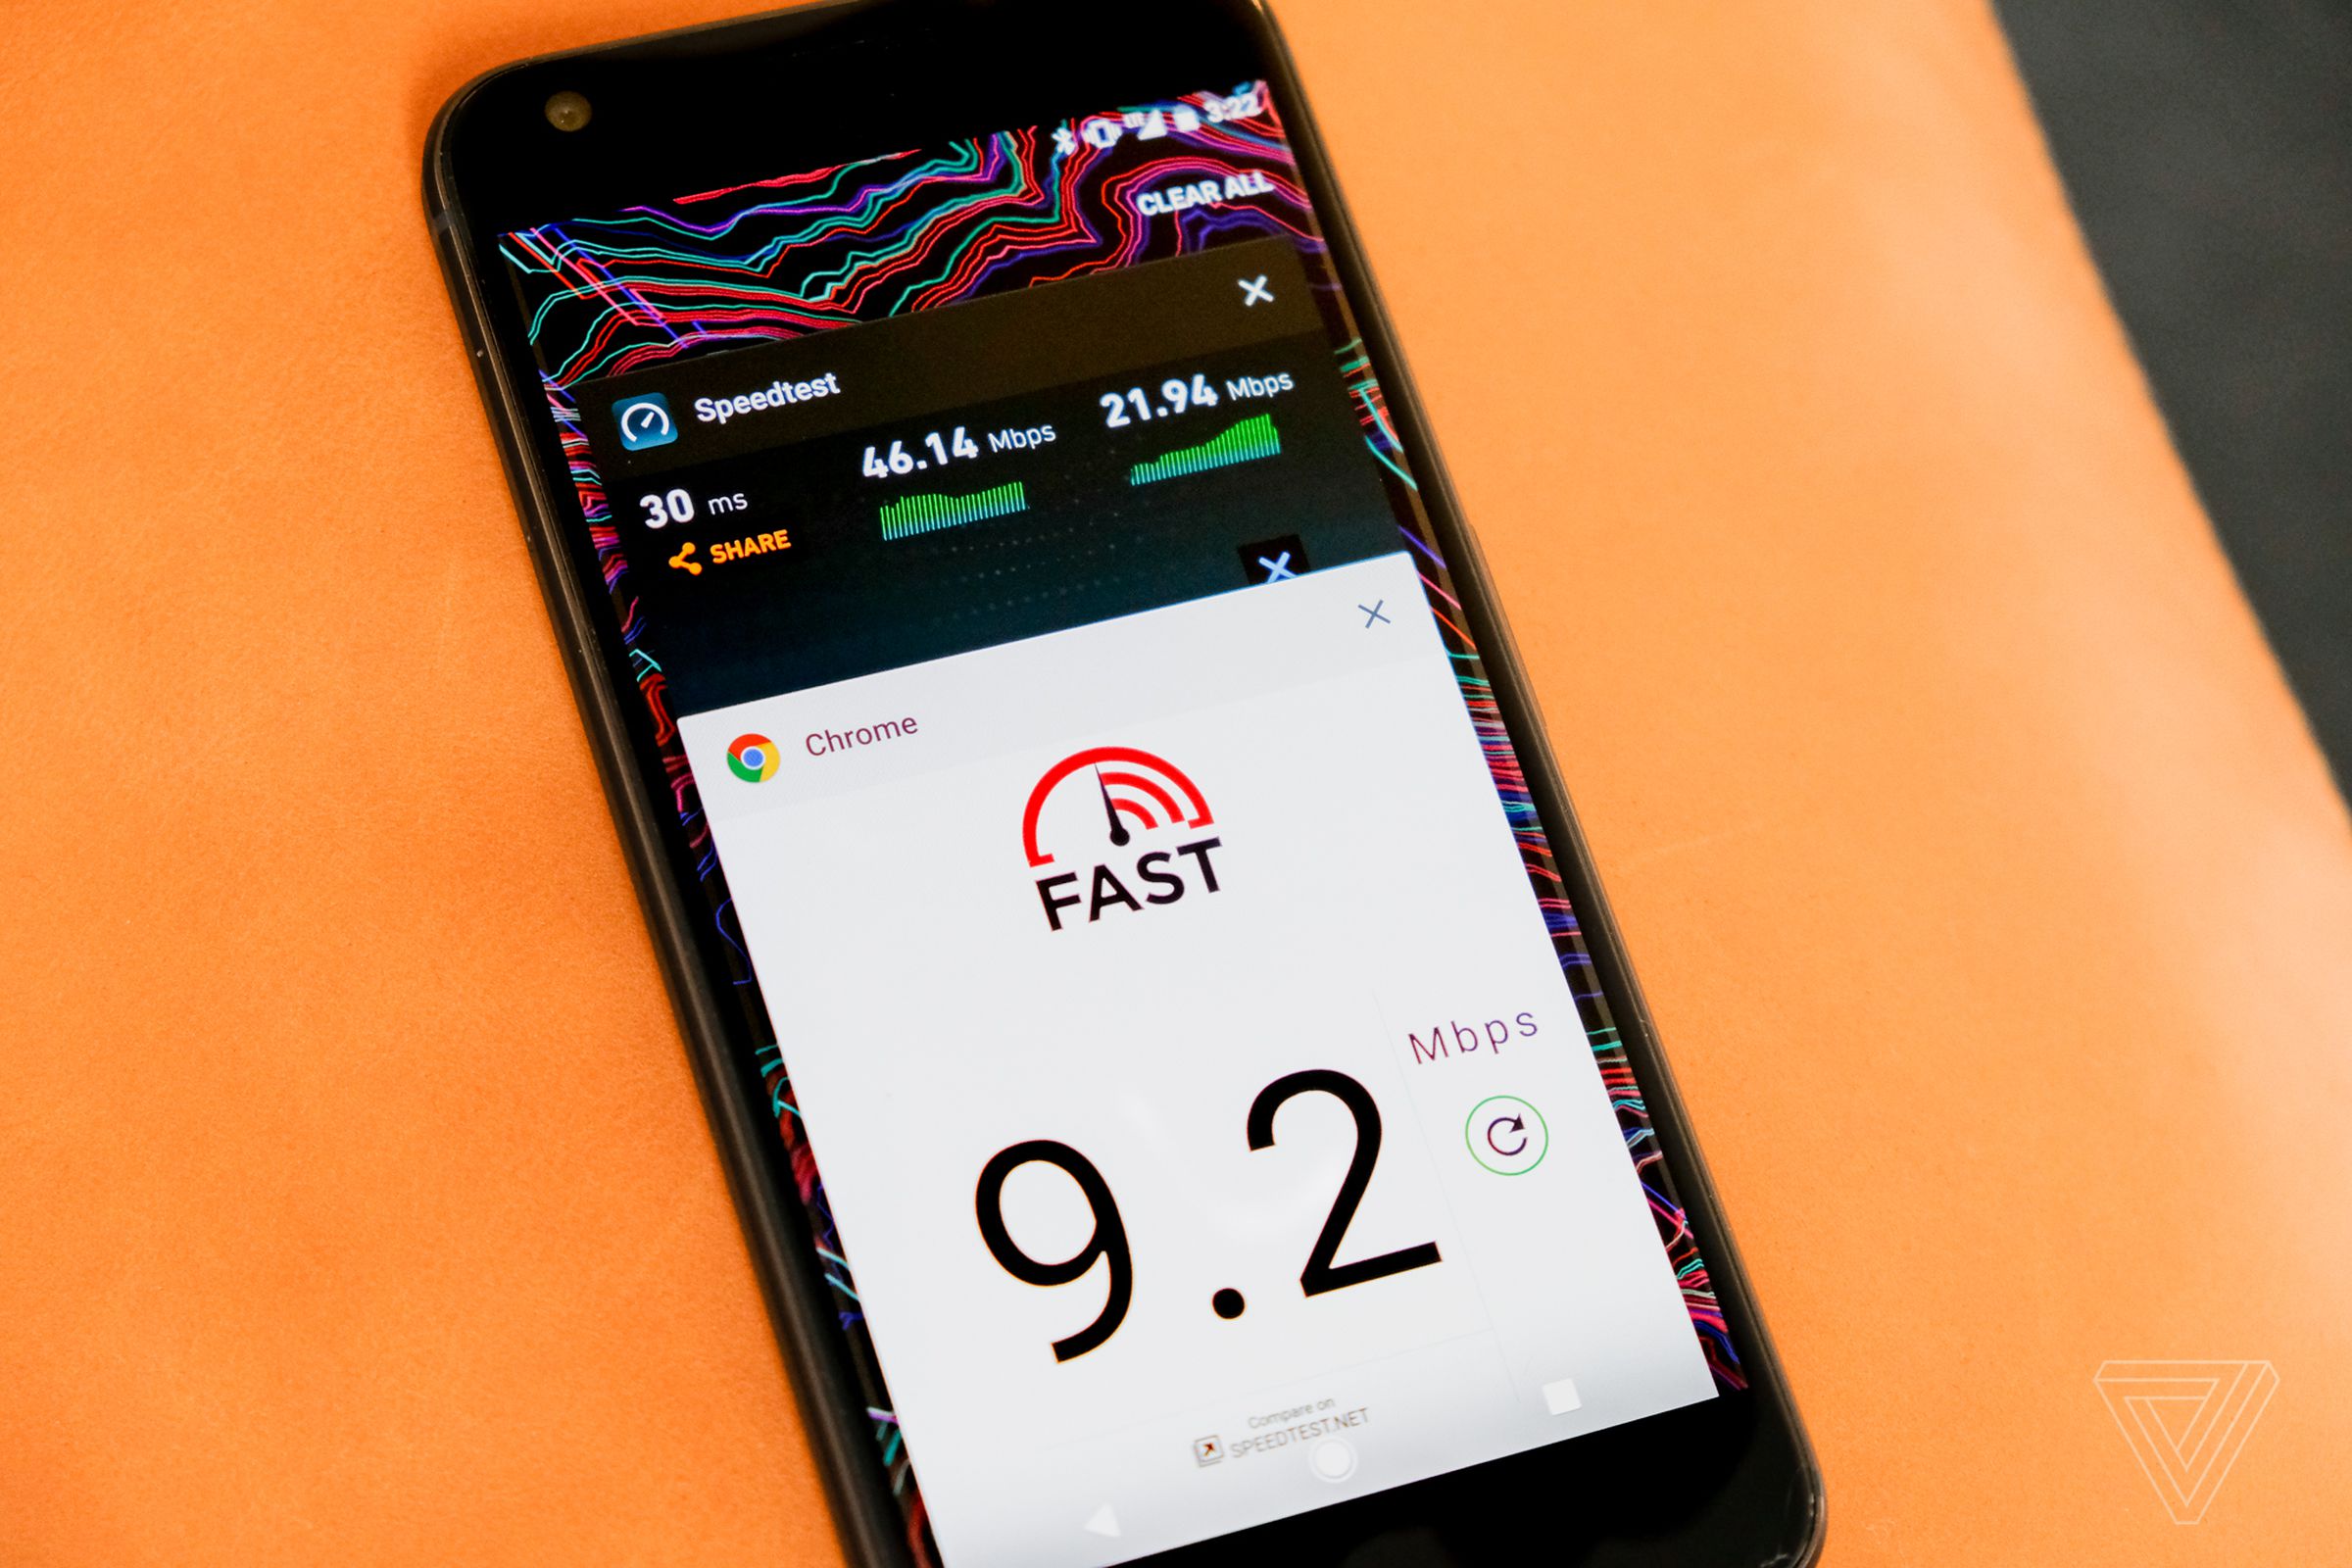 Download speeds from Ookla’s Speedtest are much faster than when using Netflix’s Fast.com.